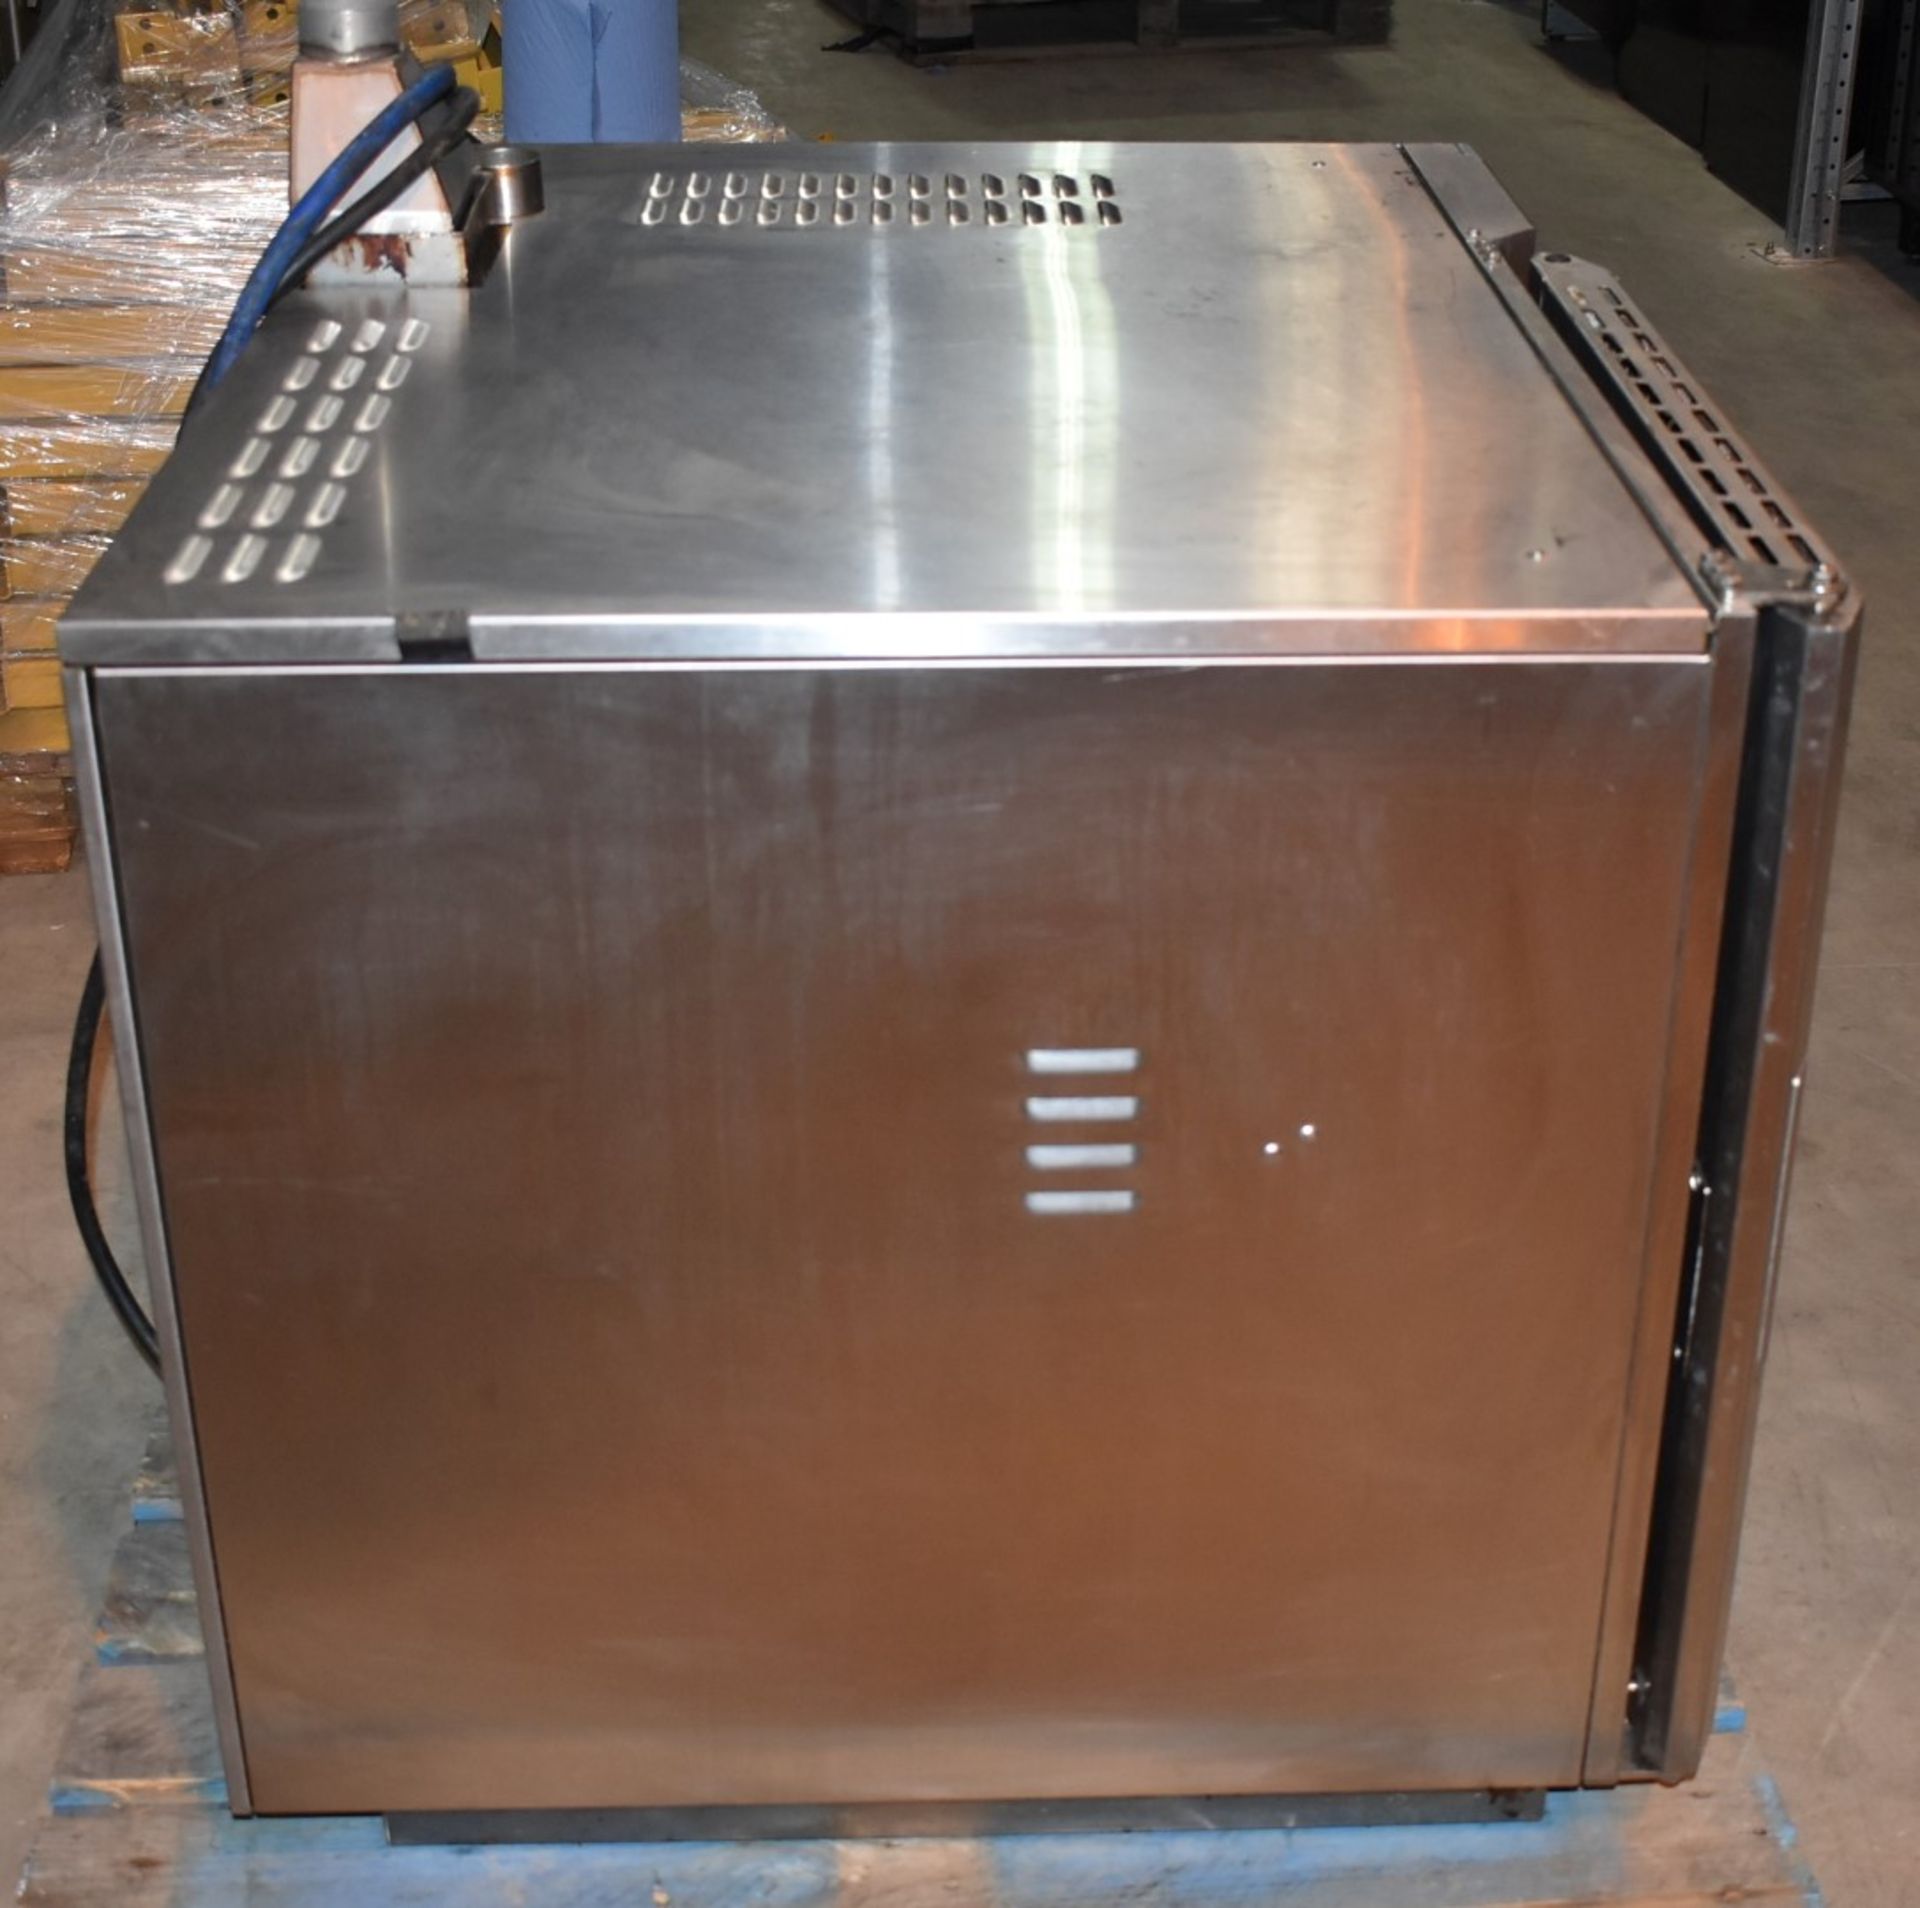 1 x Leventi Combimat mk3.1 Mastermind 6 Grid Combi Steam Oven - 3 Phase - Recently Removed From a - Image 5 of 11